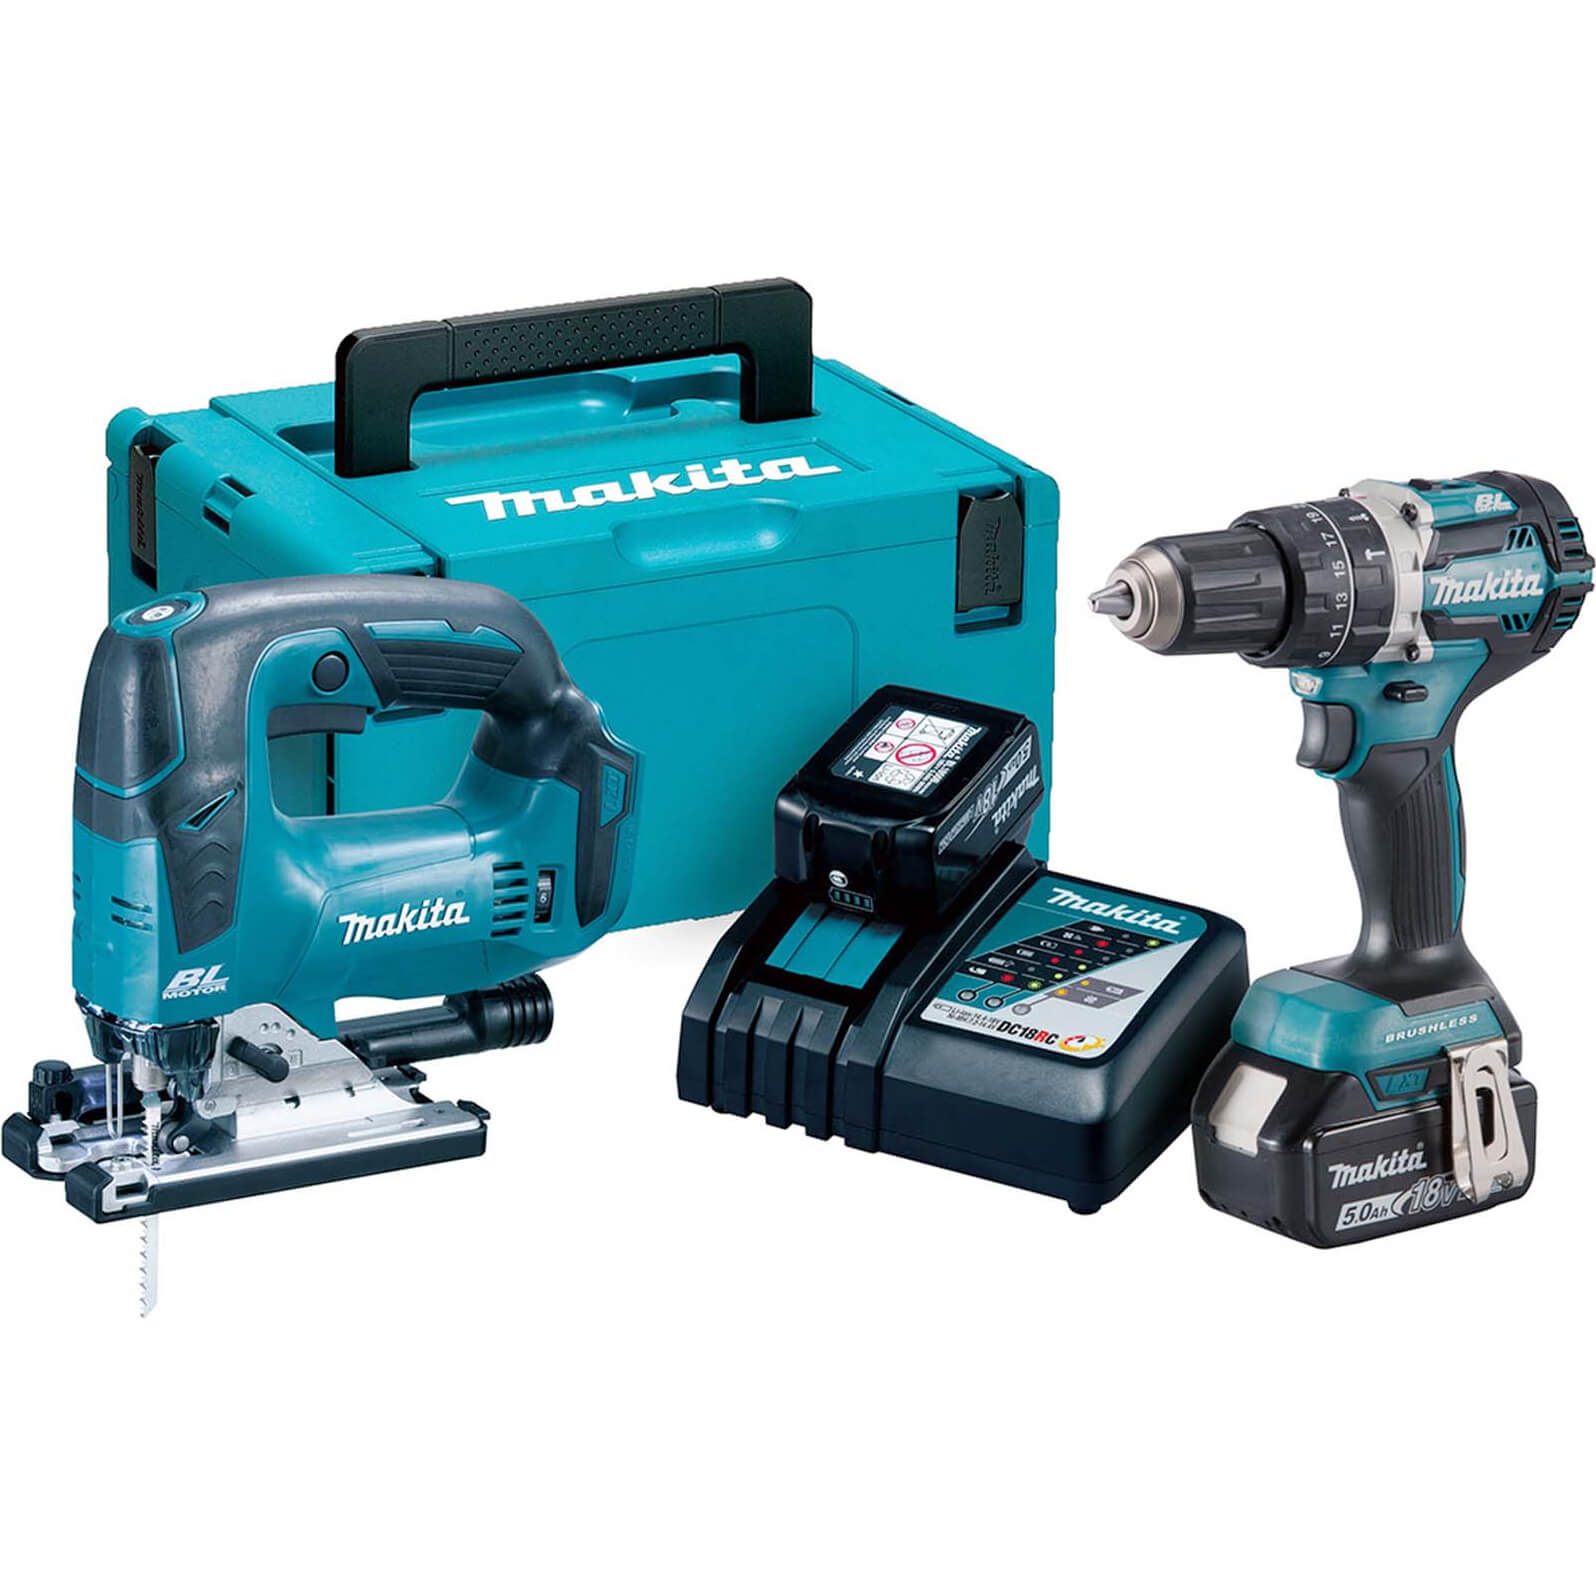 Image of Makita DLX2202TJ1 18v LXT Cordless Brushless Combi Drill and Jigsaw Kit 2 x 5ah Li-ion Charger Case